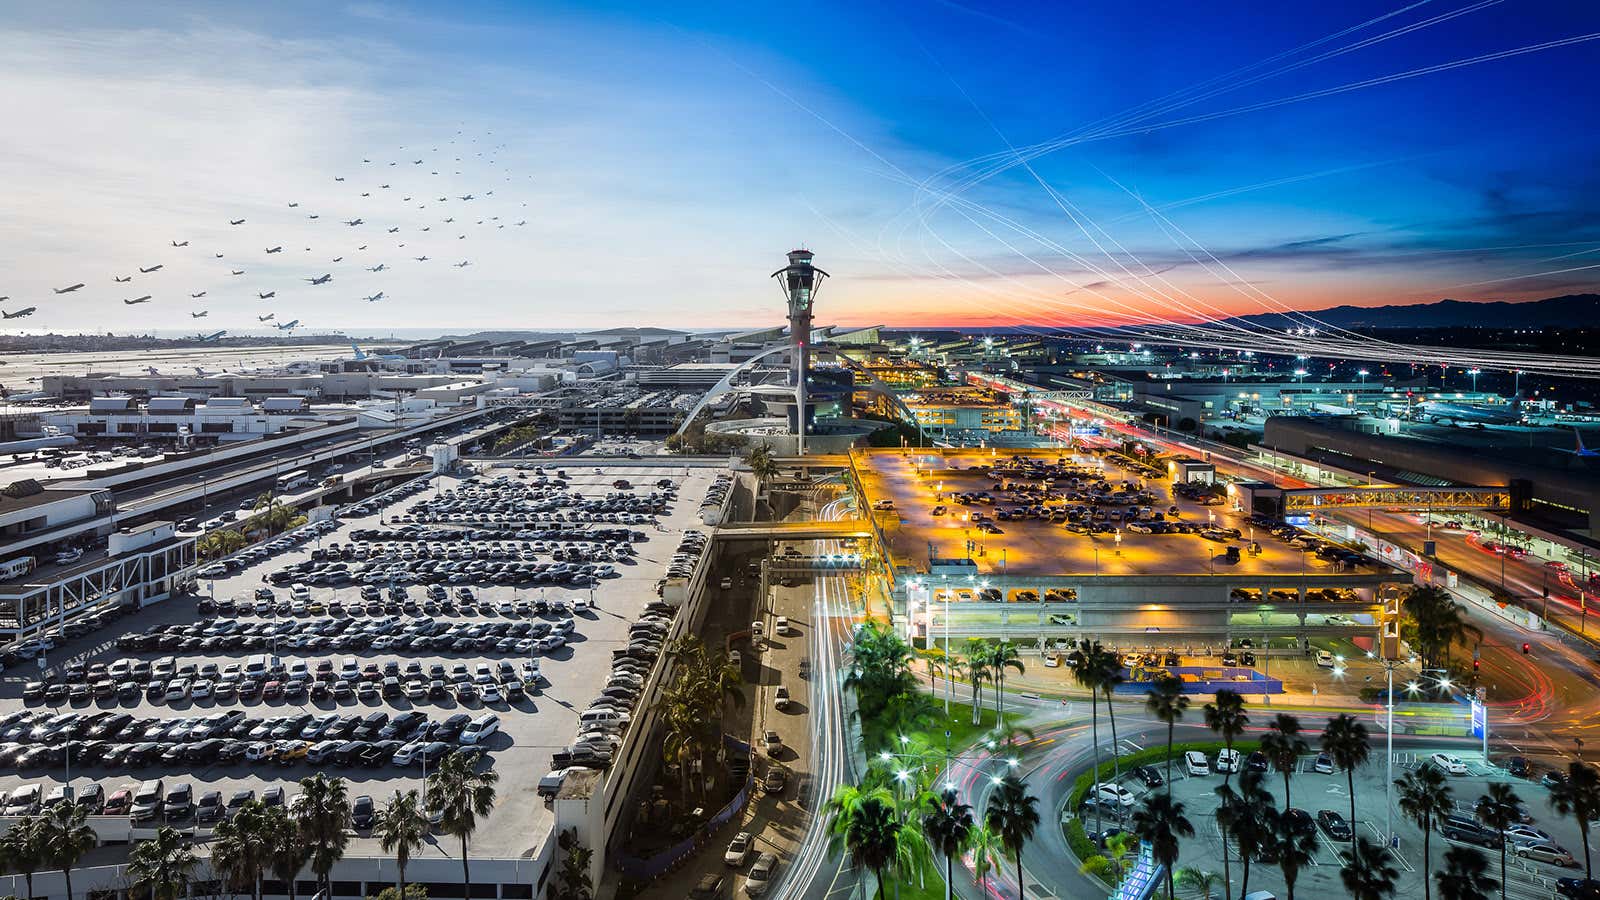 A network without centralized management is as a chaotic as an airport without an air traffic control center.